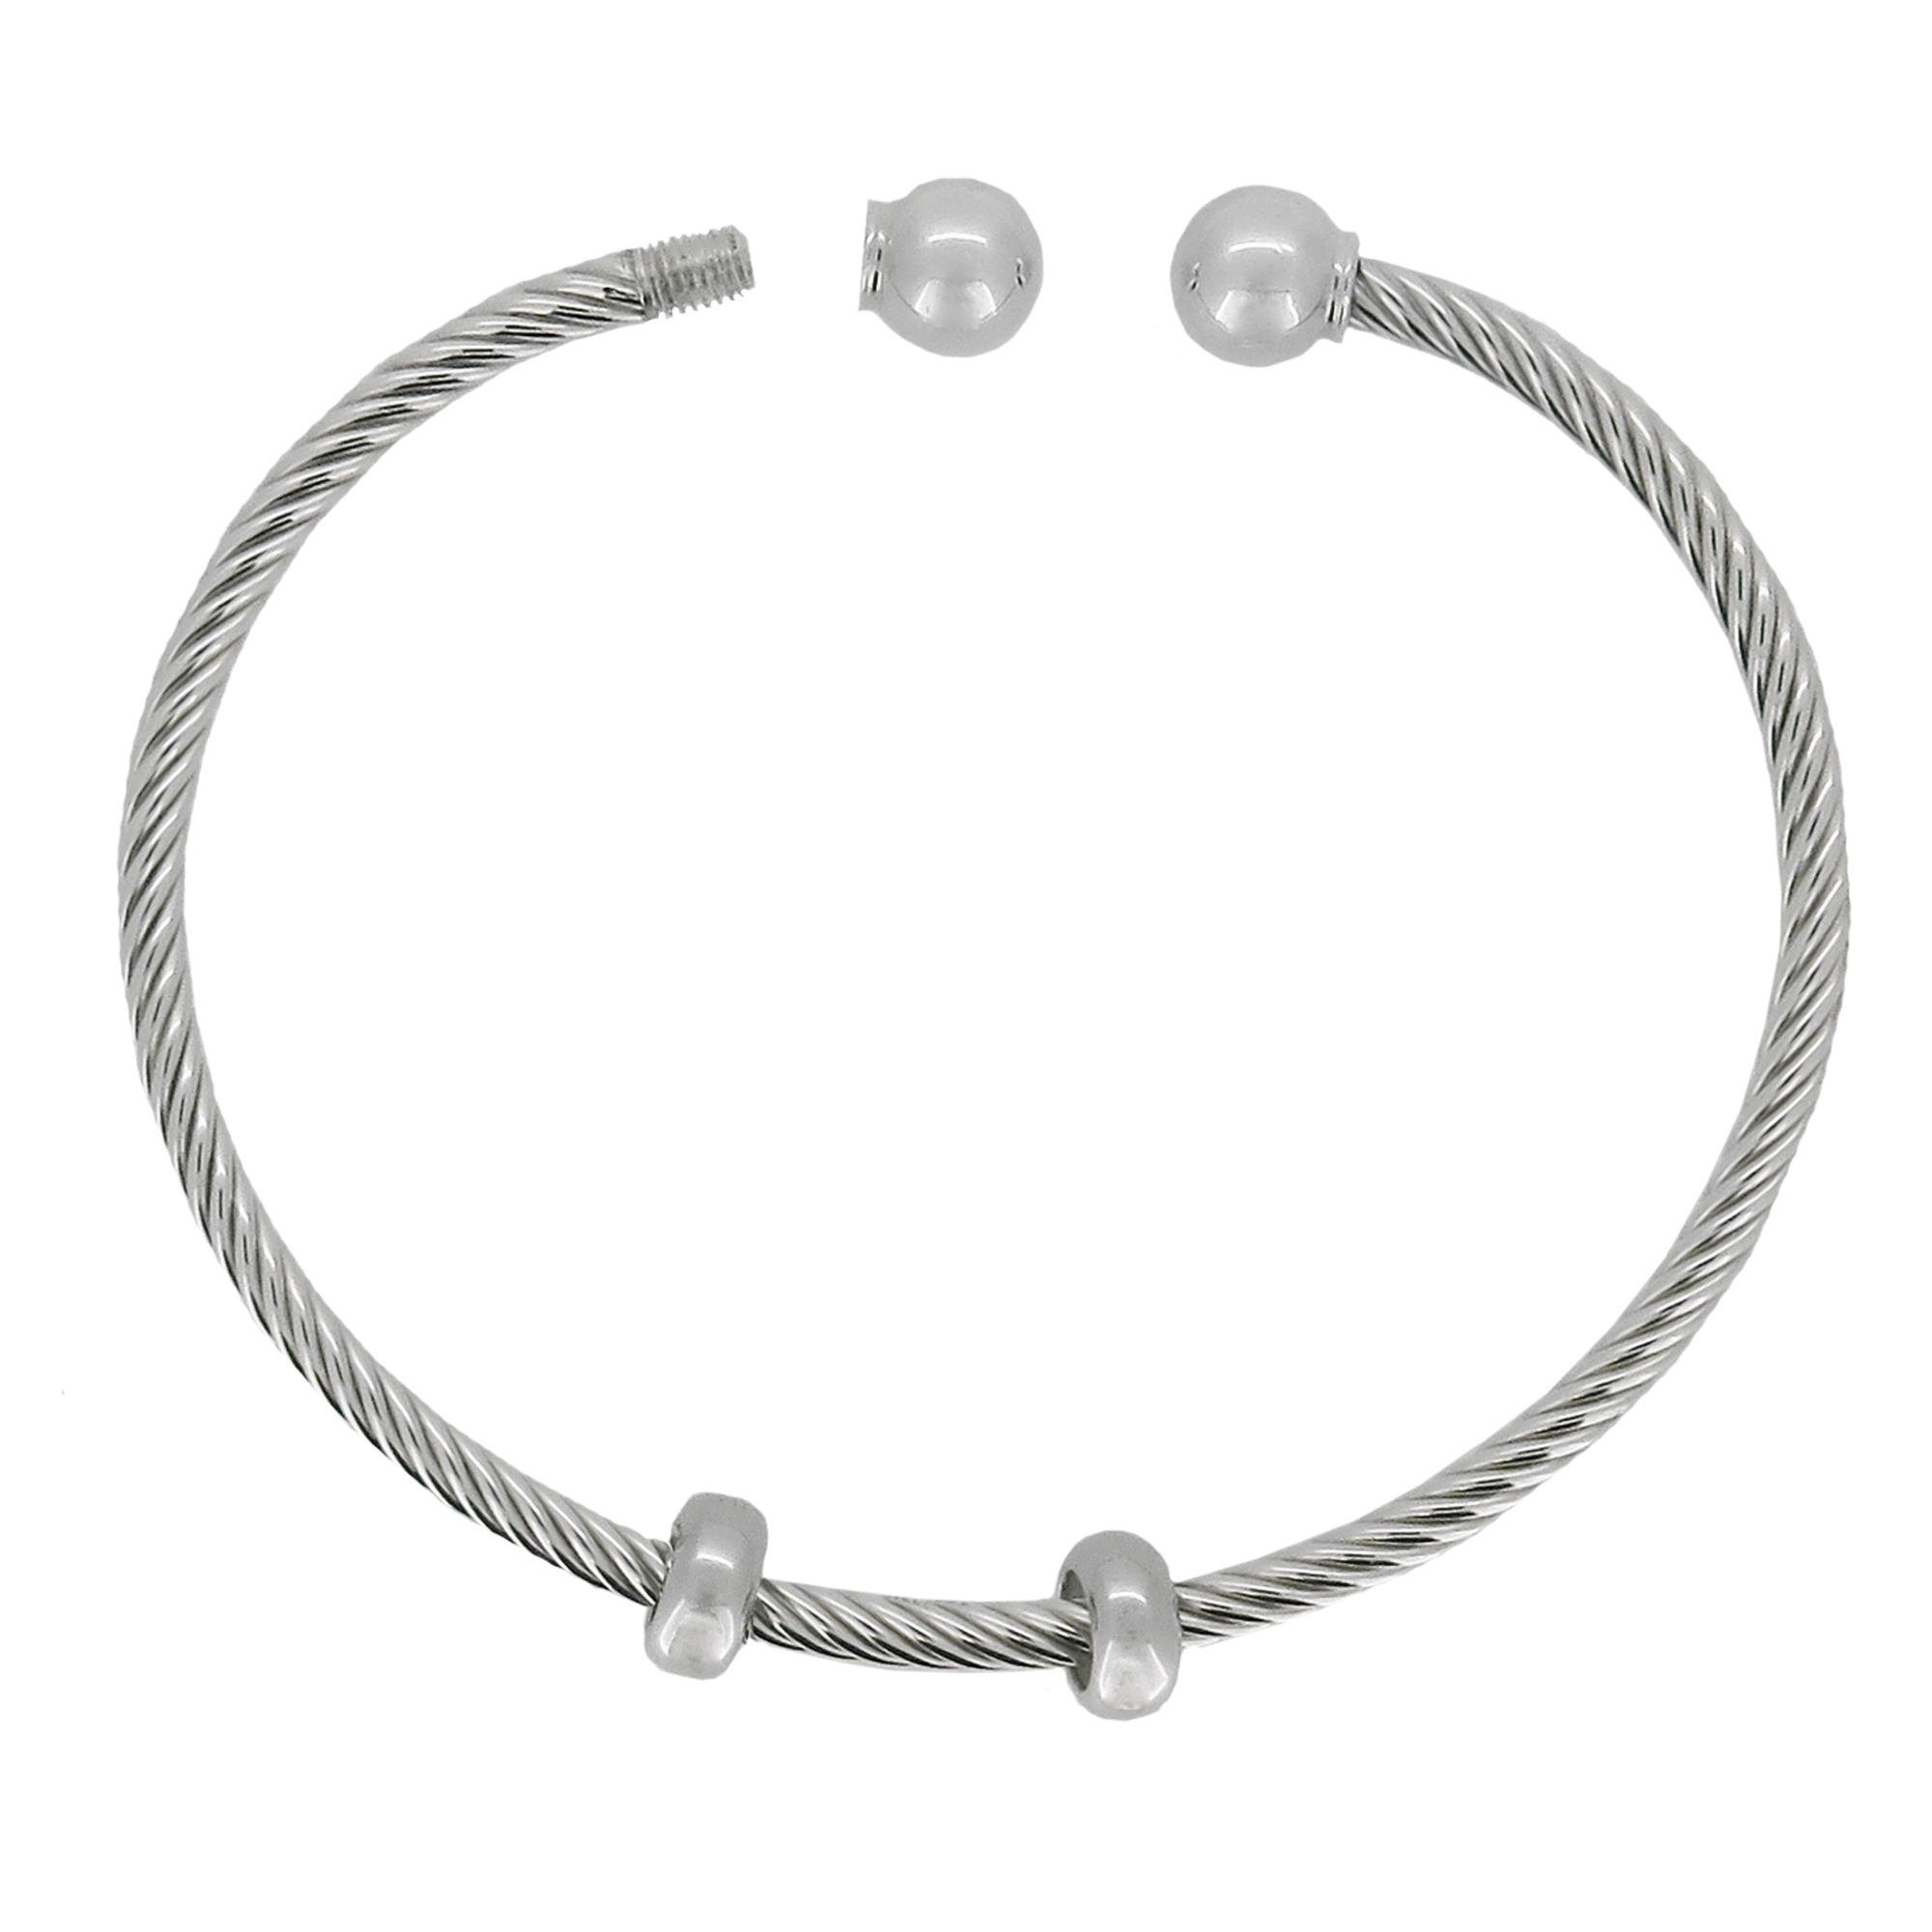 Cable Bangle w/Threaded End Bead & Spacers